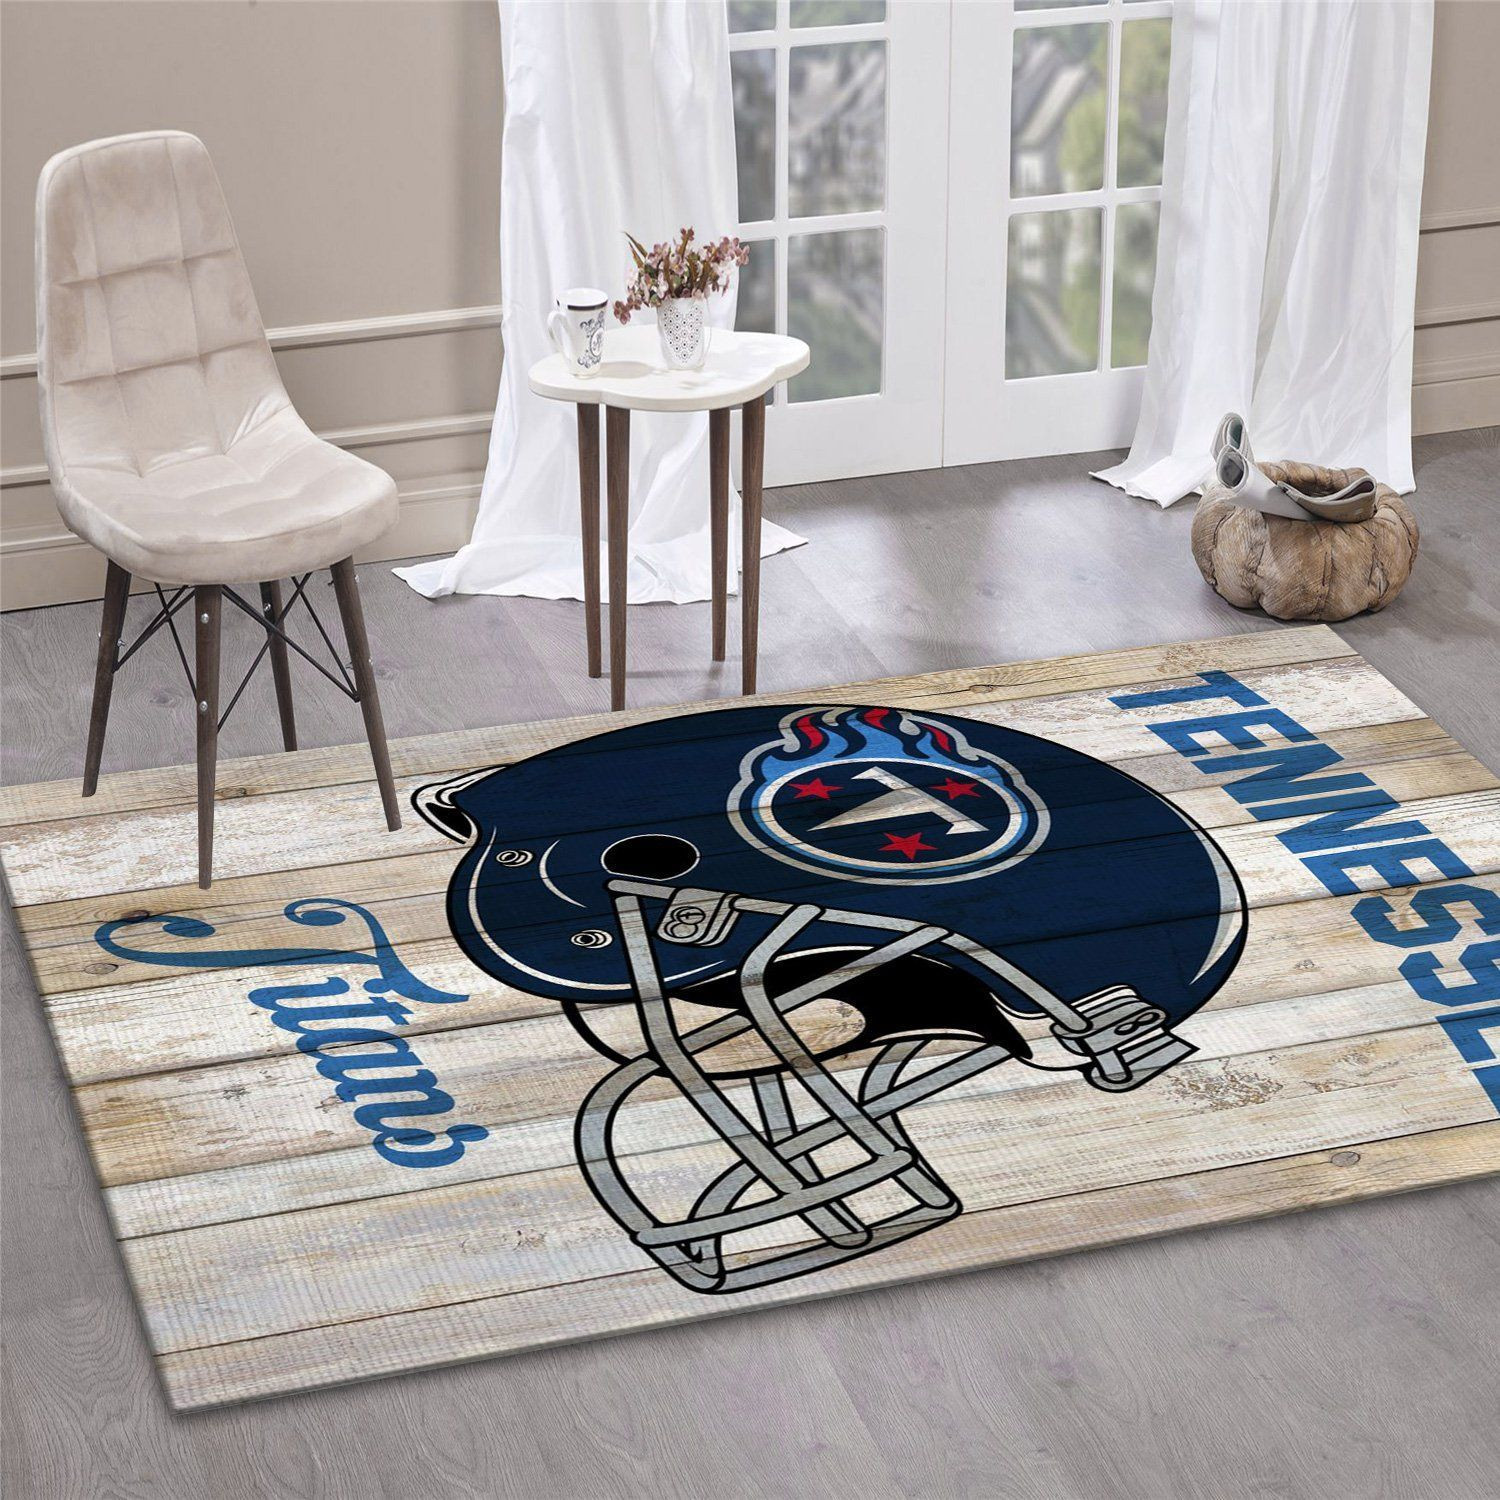 Tennessee Titans Blue Nfl Rug Living Room Rug Home US Decor - Indoor Outdoor Rugs 3